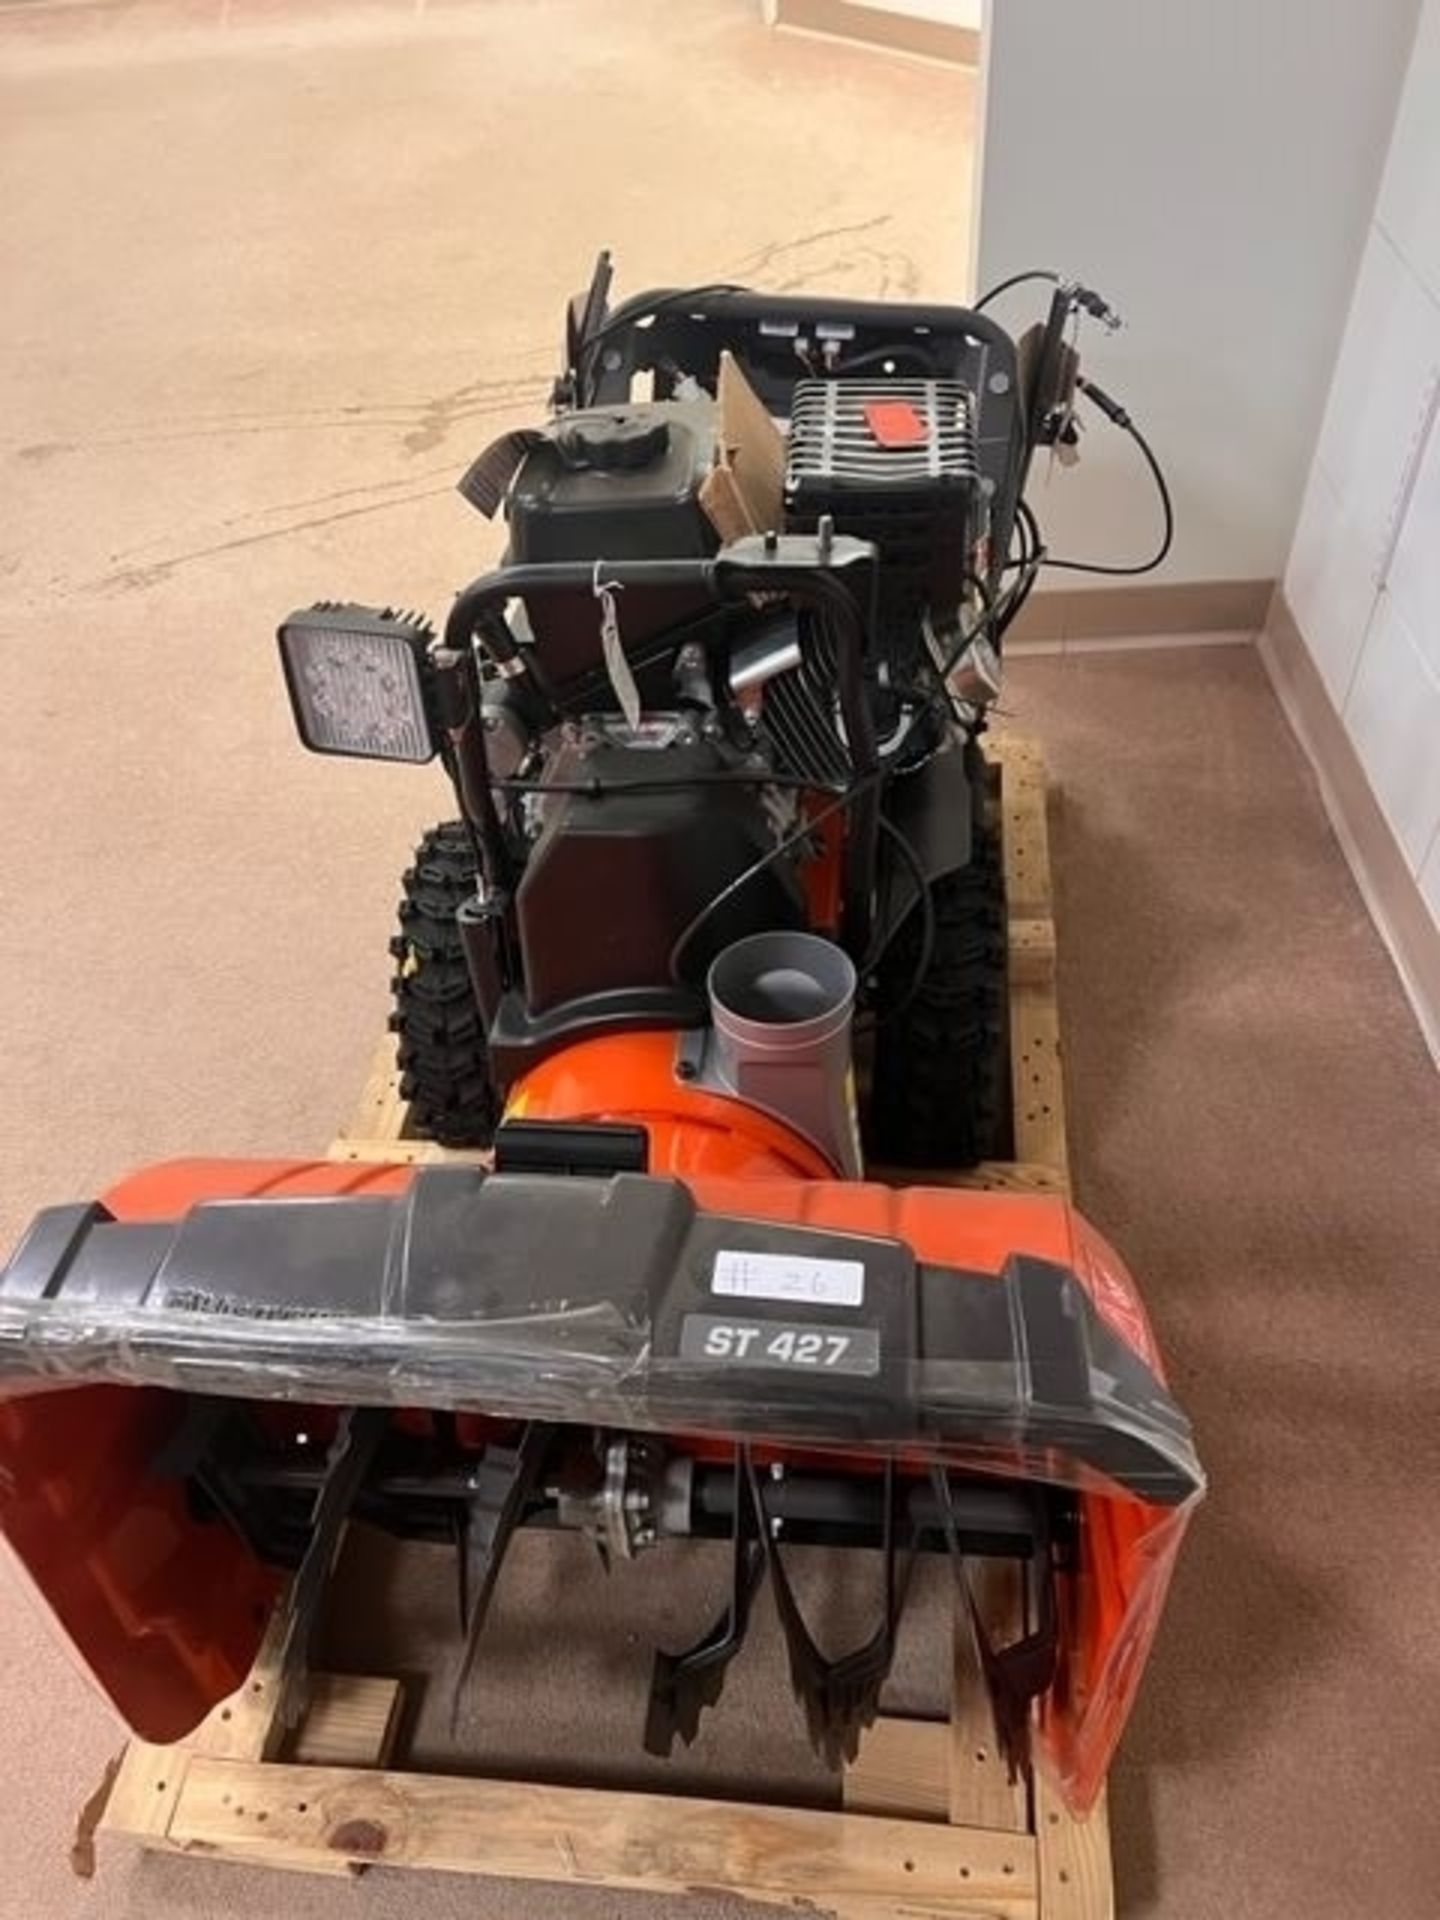 Husqvarna ST 427 Self Propelled Snow Blower - Approx MSRP $2399 - Image 5 of 5